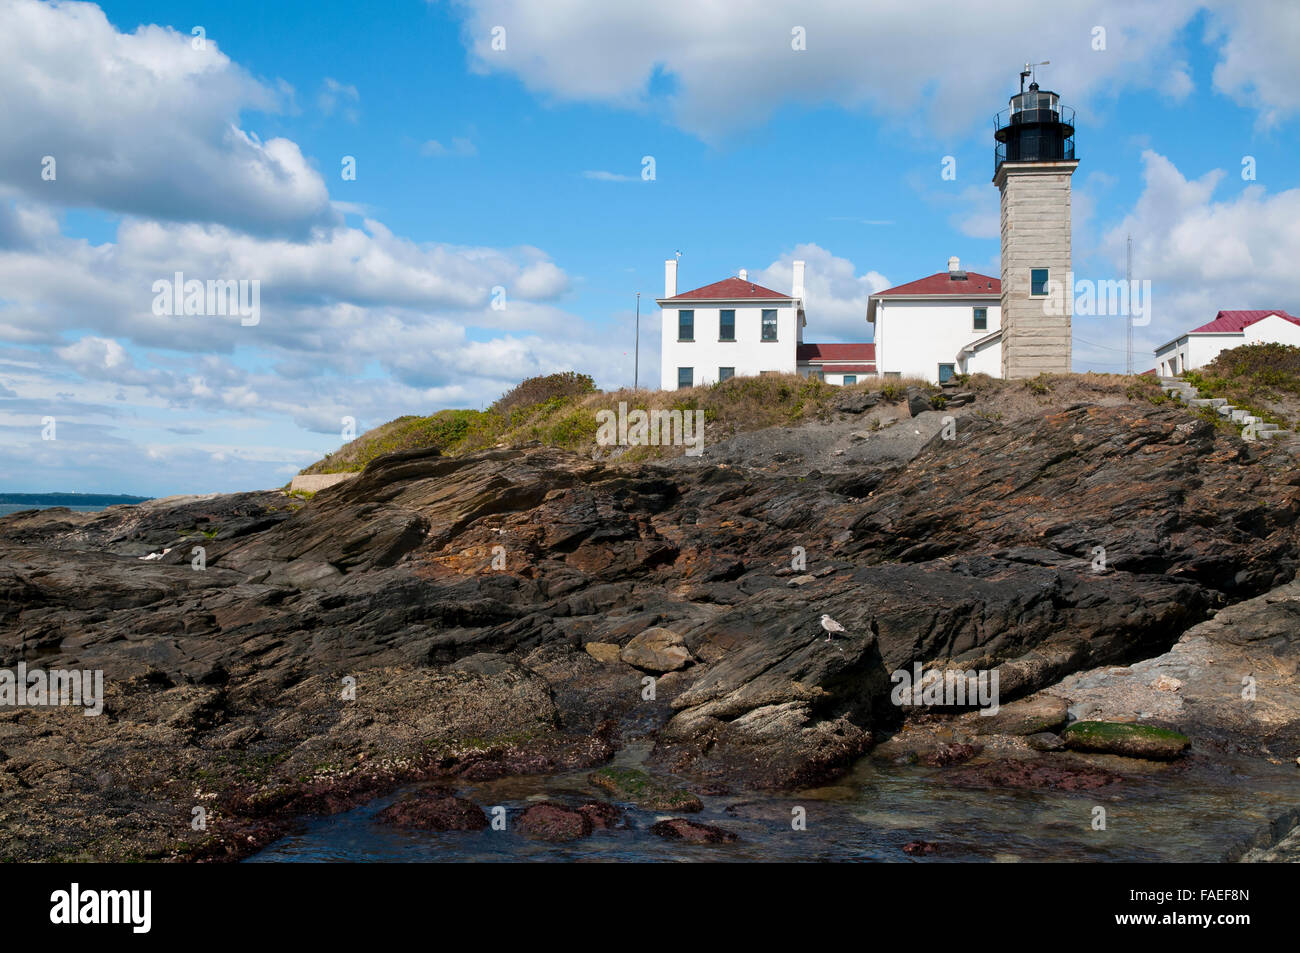 Beavertail lighthouse with its Colonial stone architecture guarding atop unique rock formations, is a favorite Rhode Island attraction near Newport. Stock Photo